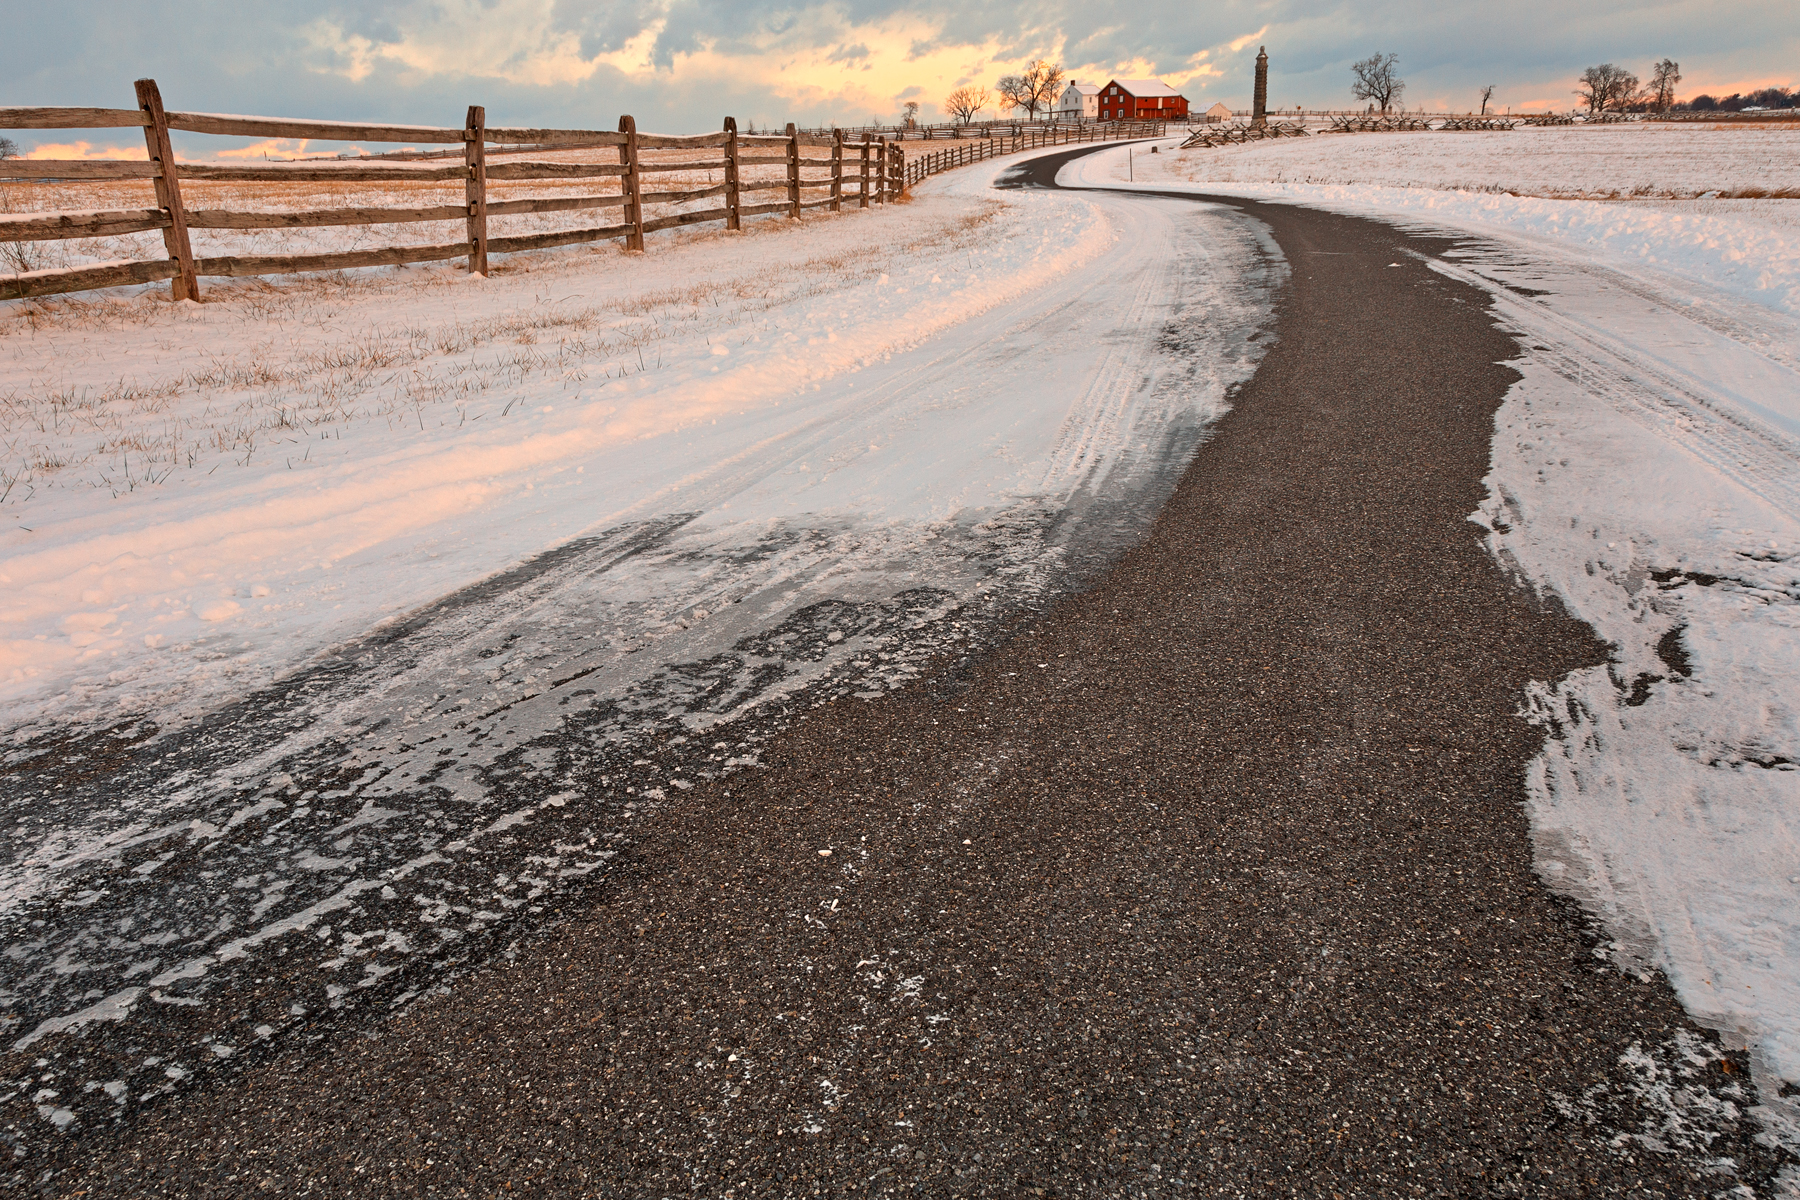 Winding winter road - hdr photo